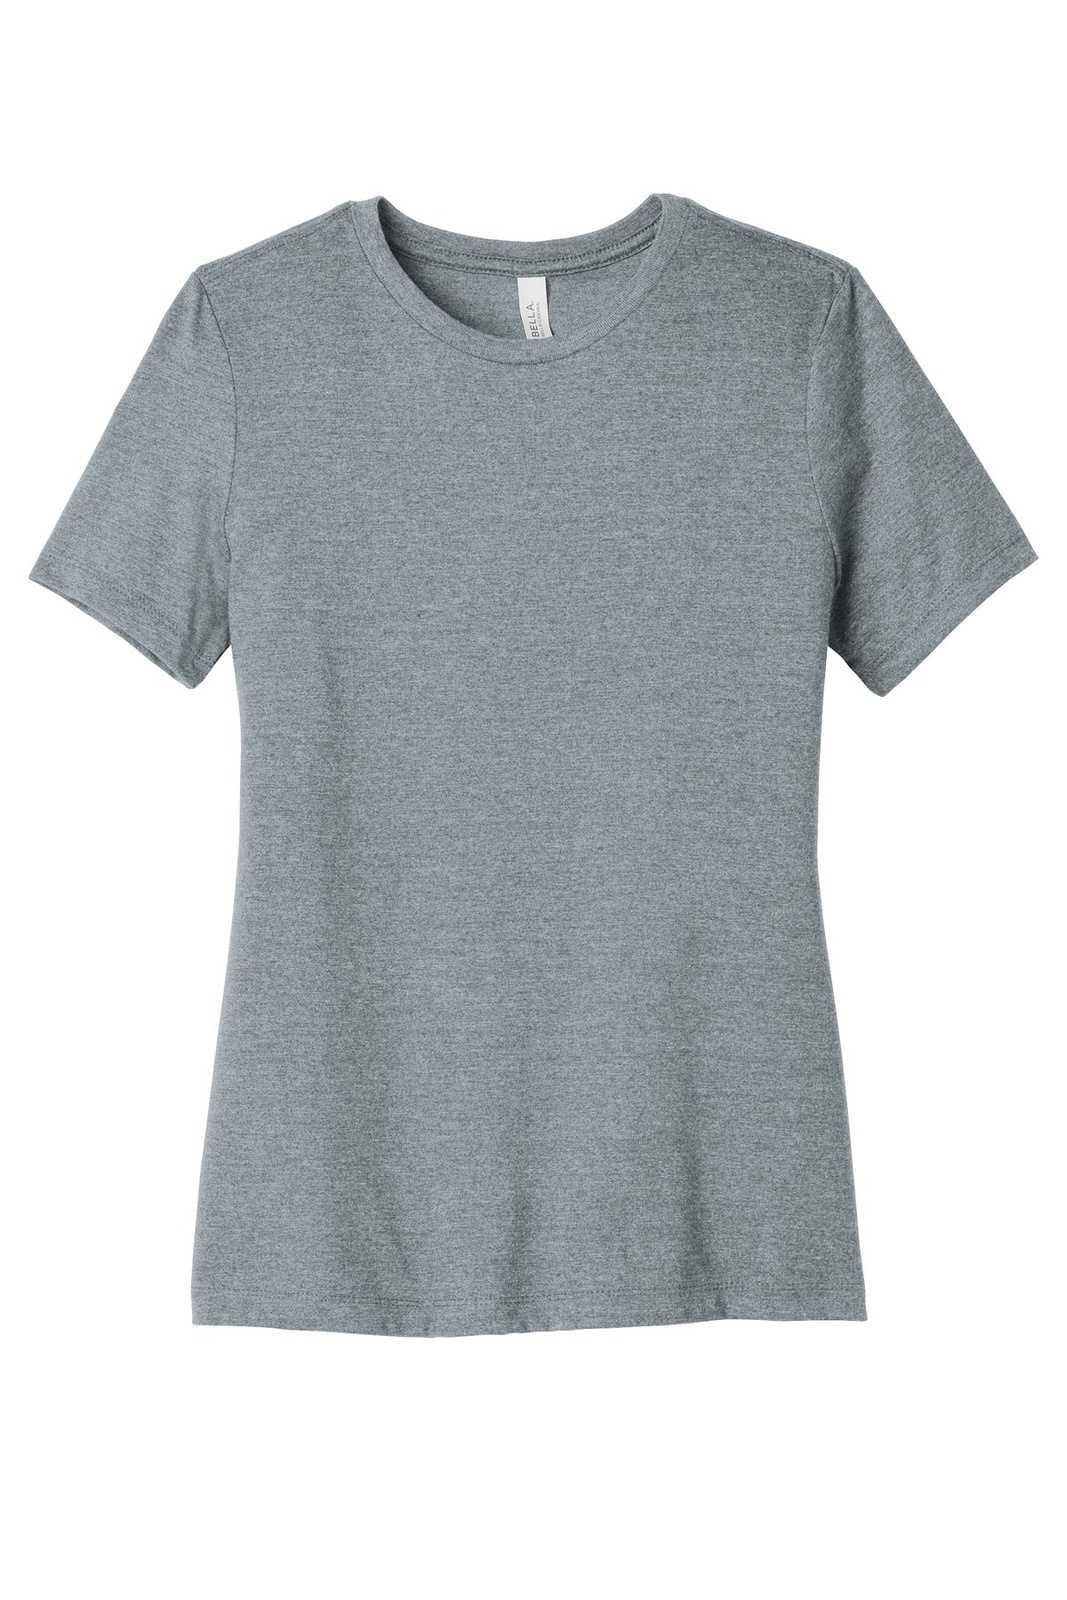 Bella + Canvas 6400 Women's Relaxed Jersey Short Sleeve Tee - Athletic Heather - HIT a Double